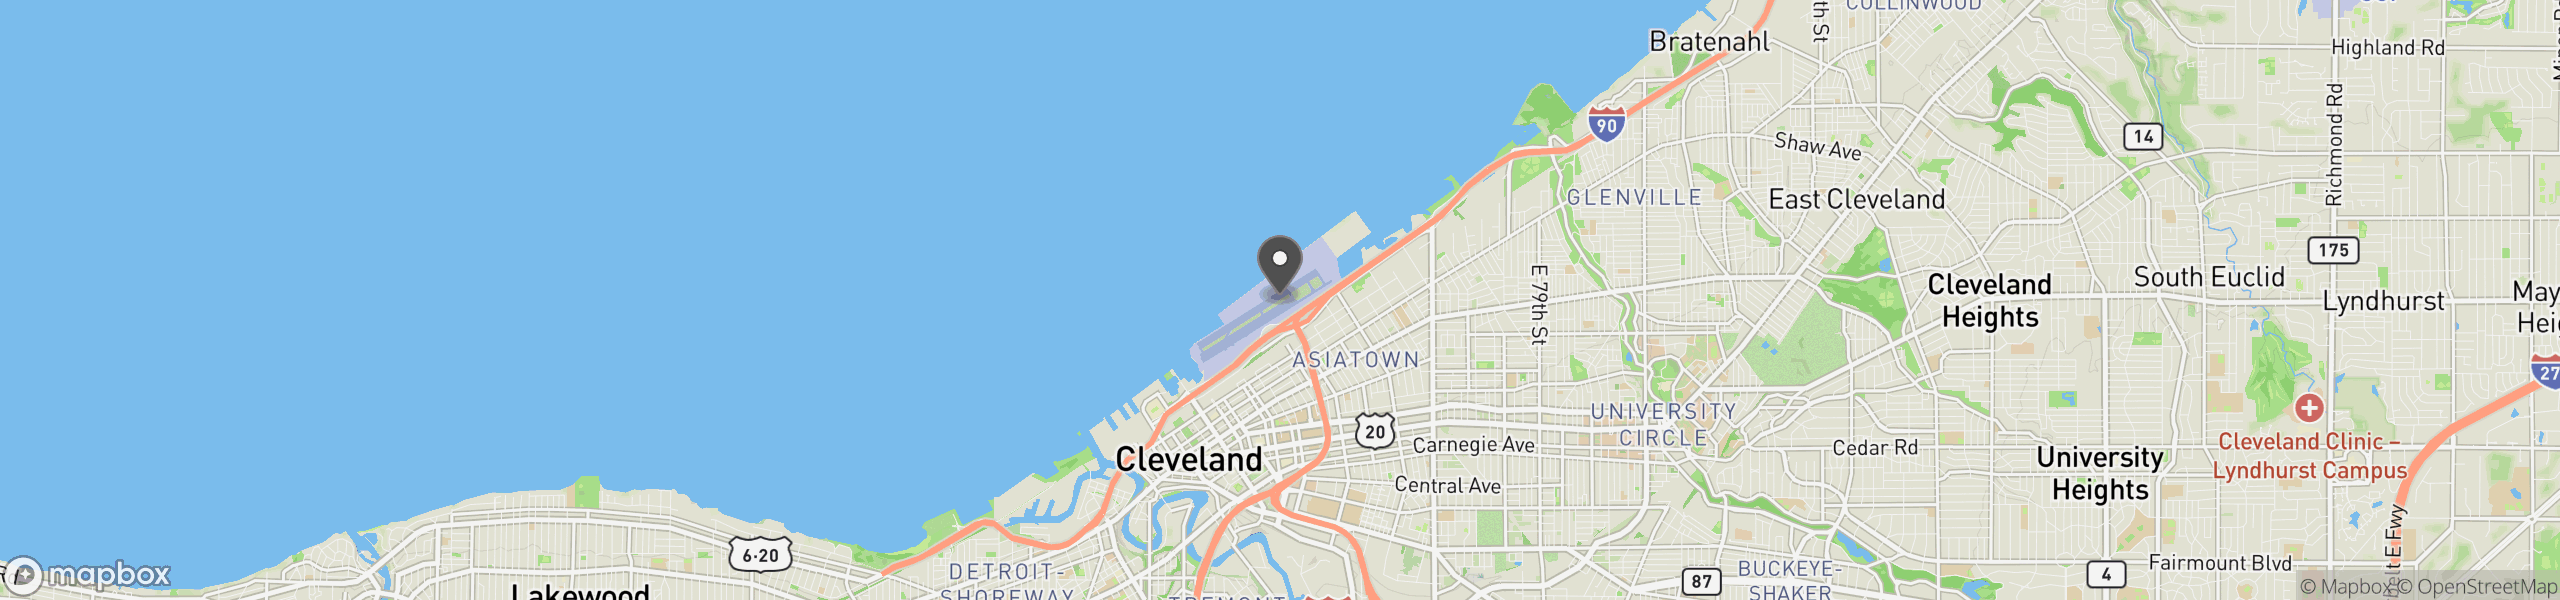 Cleveland, OH 44114